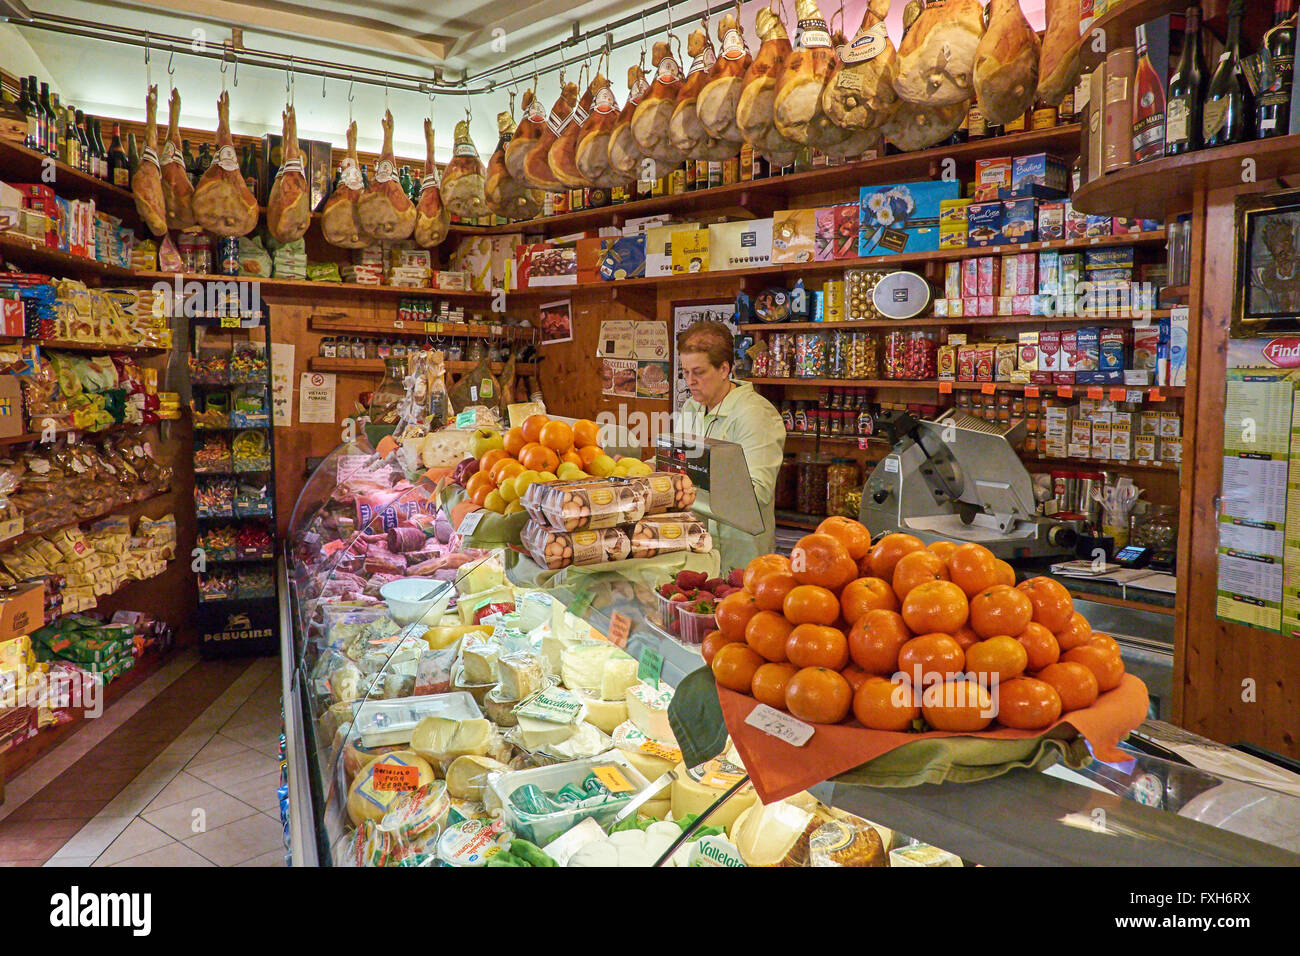 Forno Alimentari G. Giurlani. Interior of Italian shop showing hams, cheeses and a range of other goods. Stock Photo